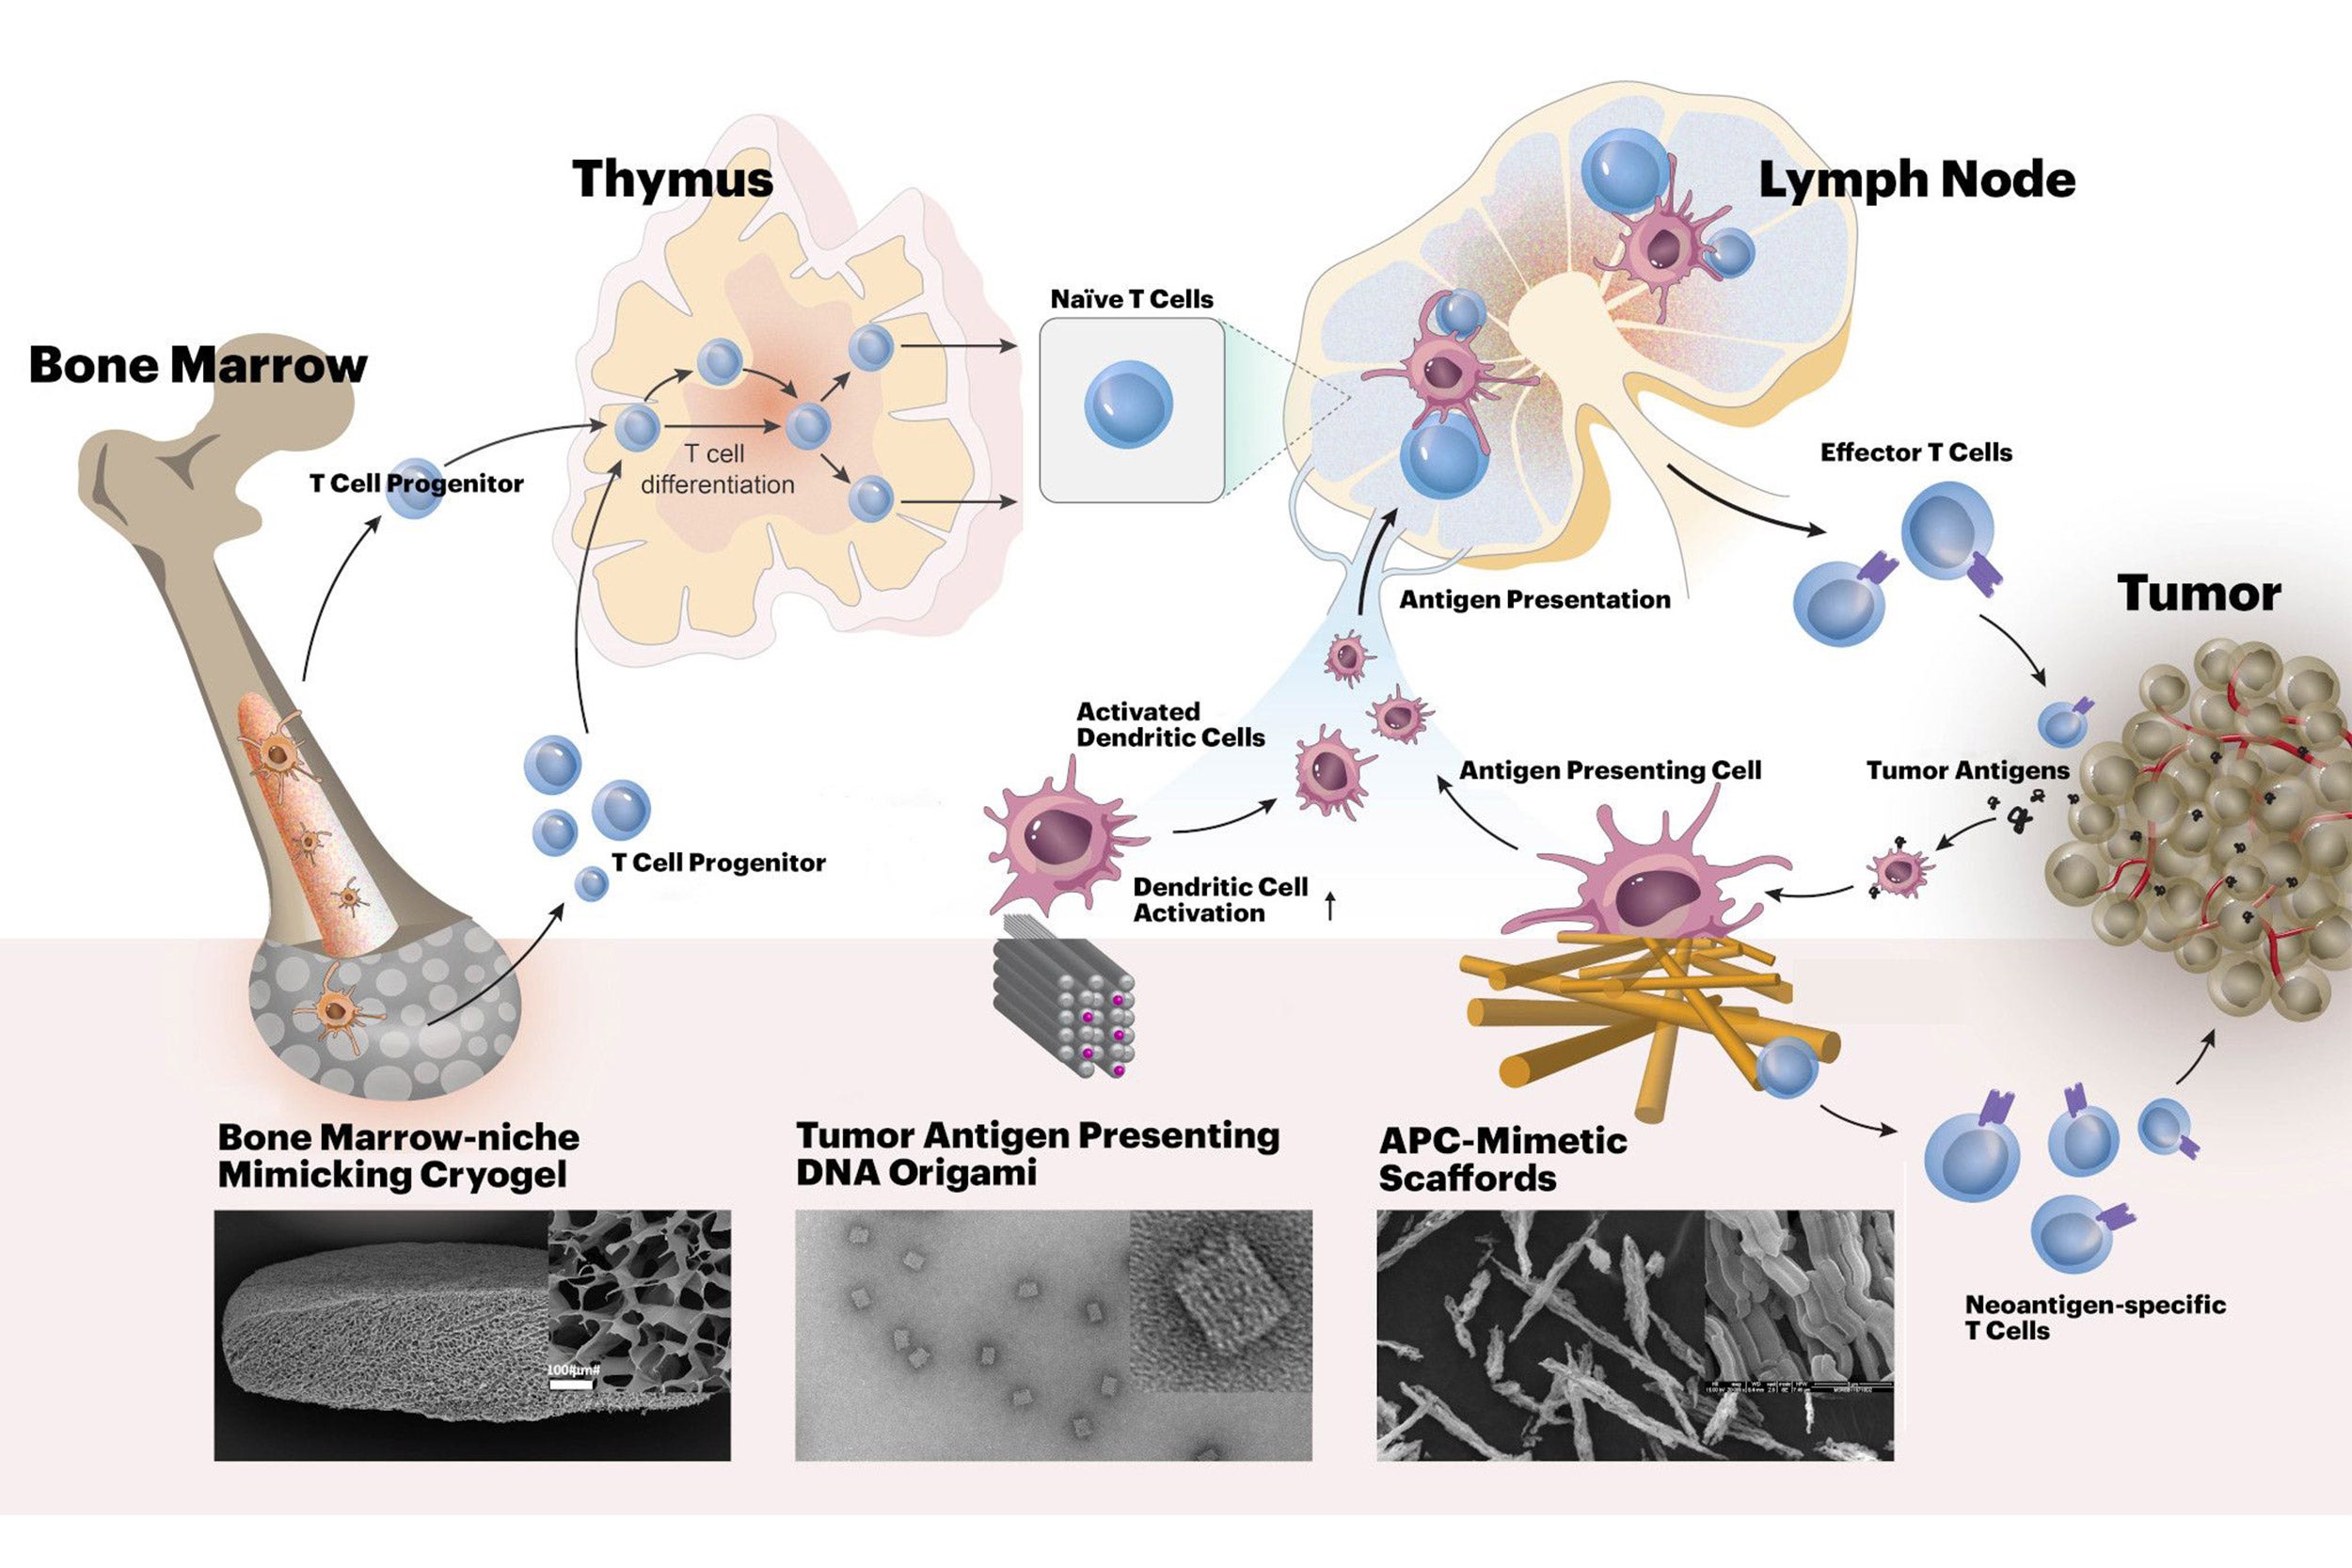 Harvard’s i3 Center will develop new biomaterials-based approaches for cancer immunotherapy. The materials will enhance tumor-specific activities of cytotoxic T cells, acting at different stages of their development.